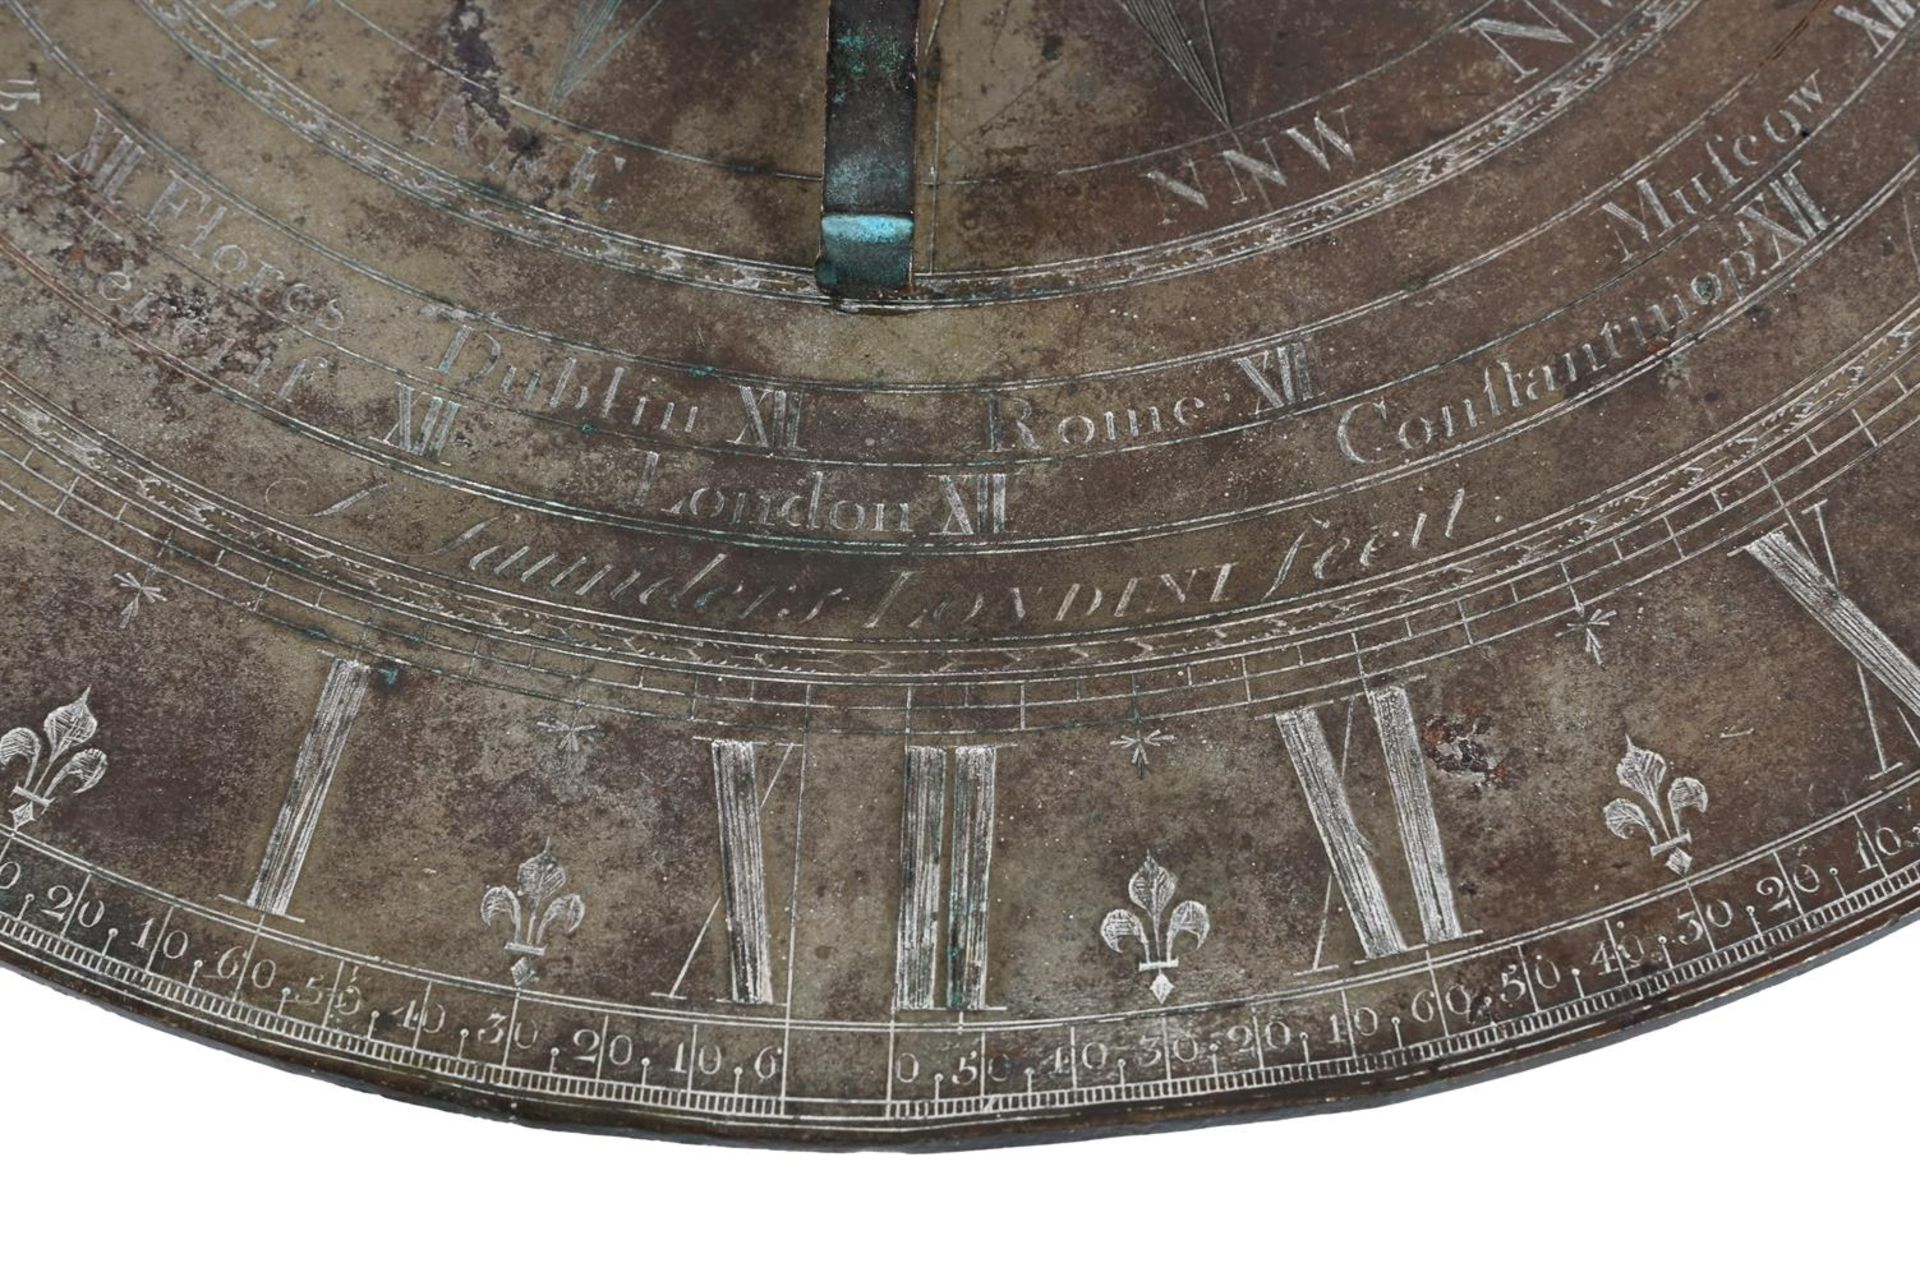 A FINE GEORGE III ENGRAVED PATINATED BRASS GARDEN SUNDIAL - Image 3 of 3